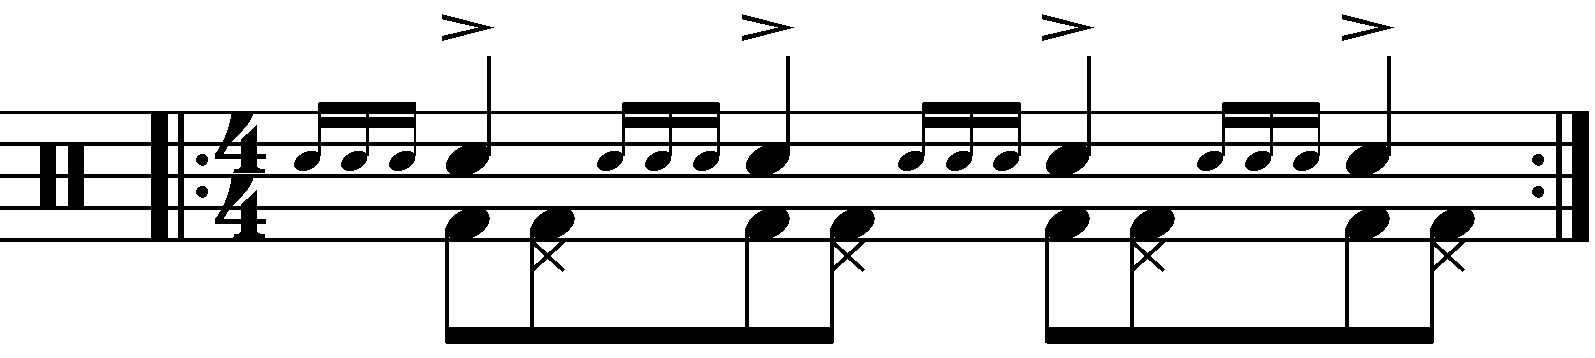 A Four Stroke Ruff with eighth note feet